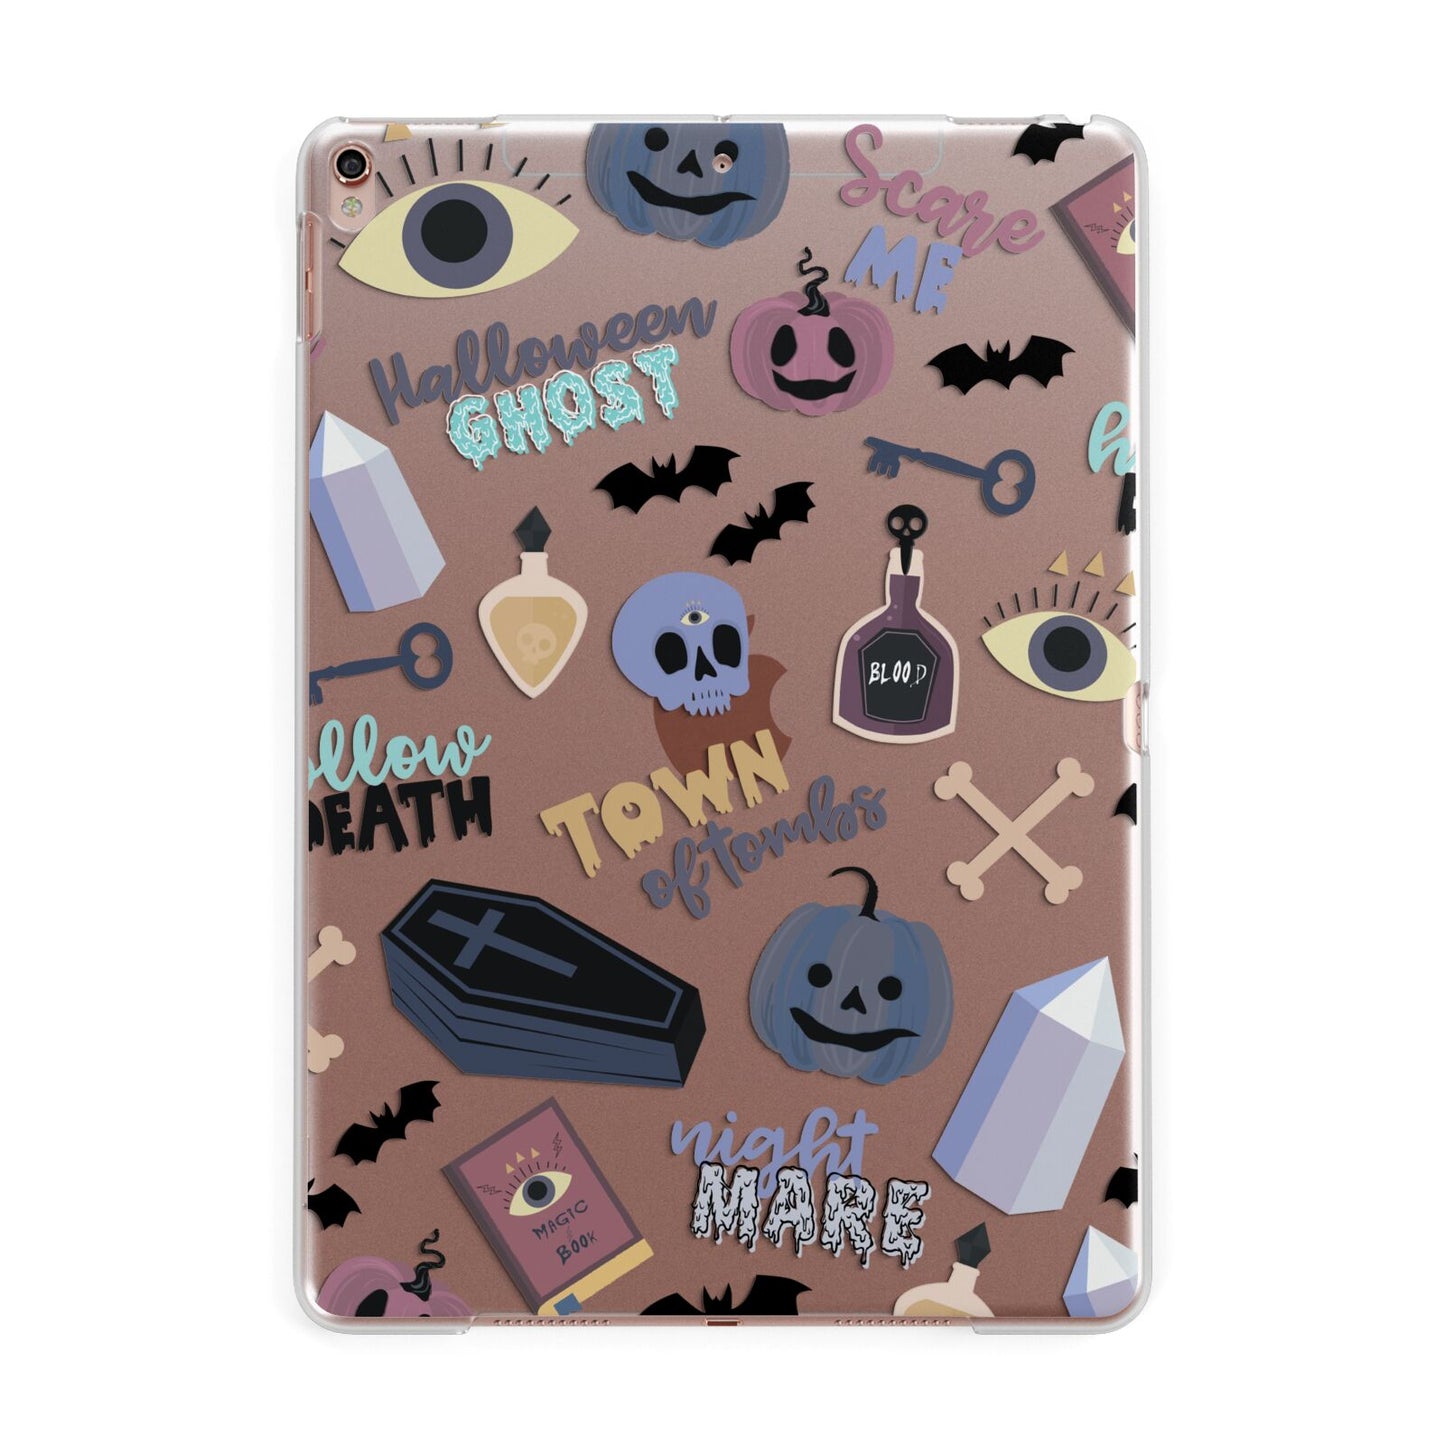 Spooky Blue Illustrations and Catchphrases Apple iPad Rose Gold Case